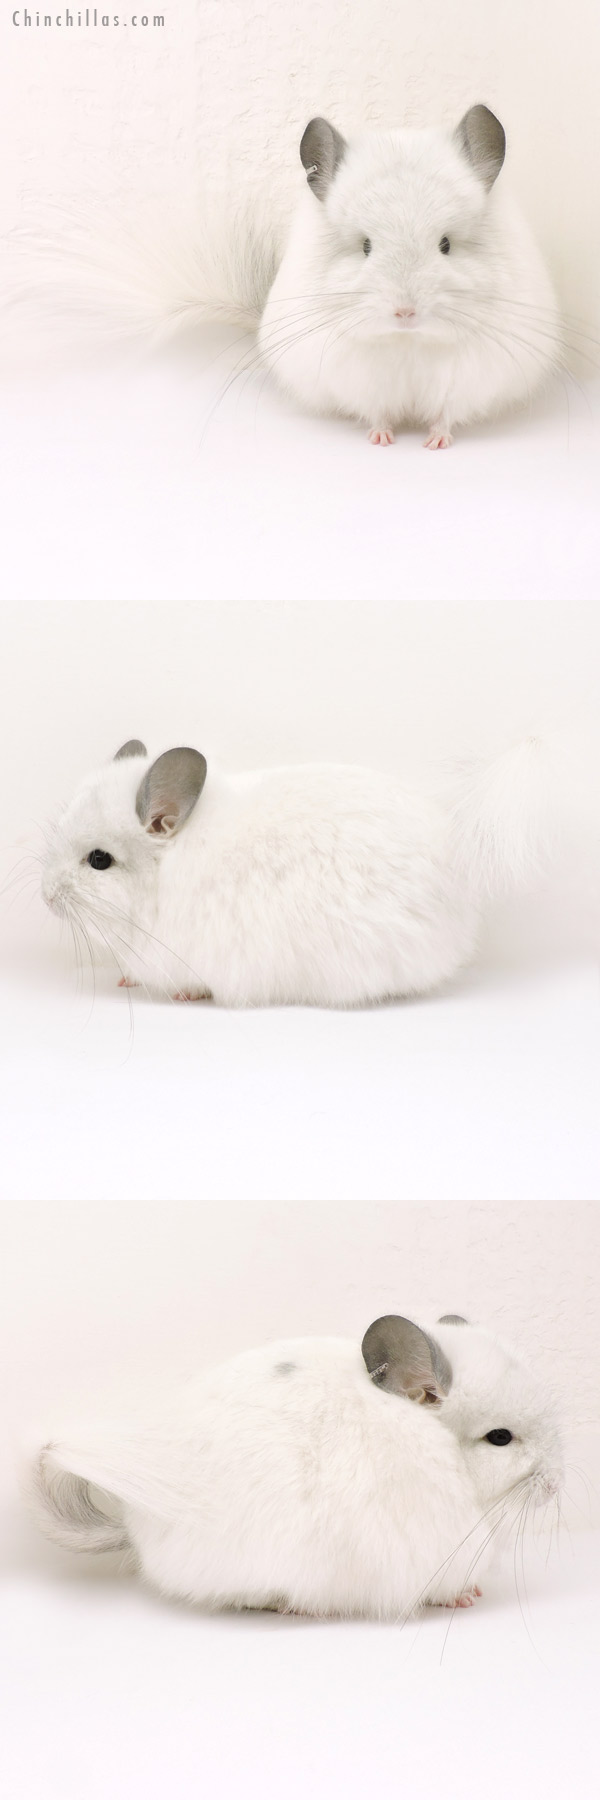 Chinchilla or related item offered for sale or export on Chinchillas.com - 14155 Exceptional White Mosaic  Royal Persian Angora Male Chinchilla